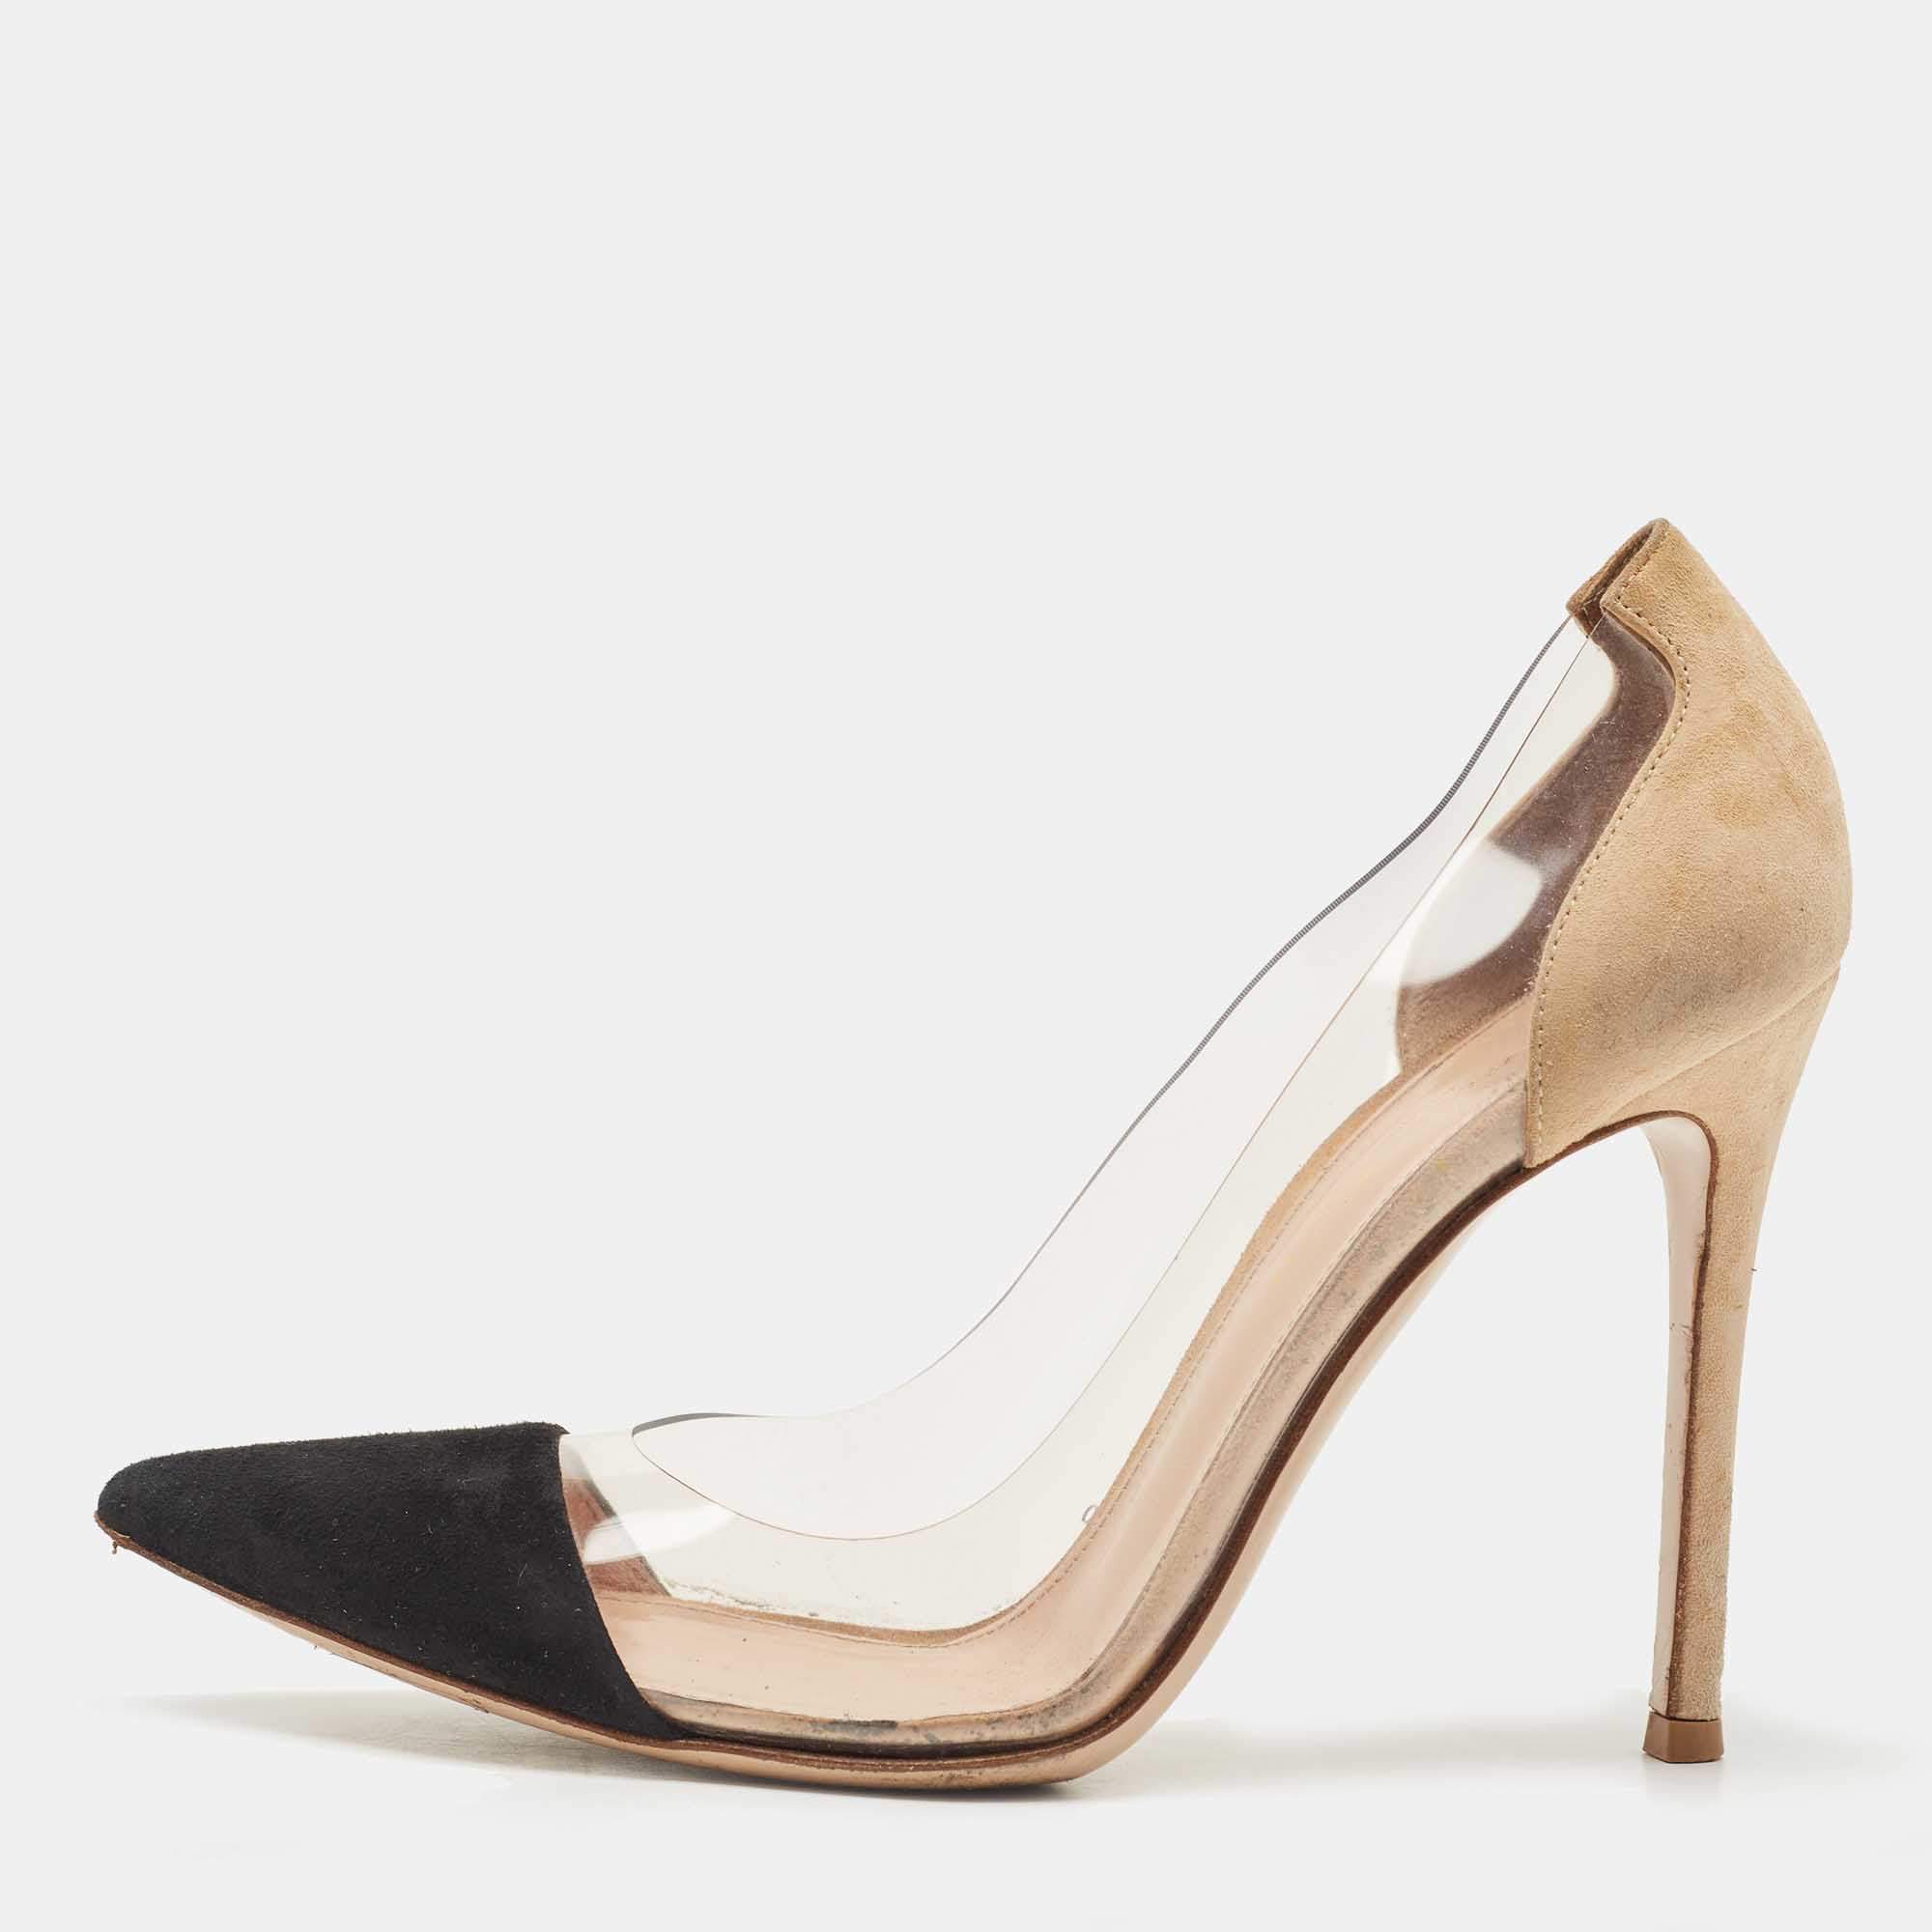 Gianvito Rossi Beige/Black Suede and PVC Plexi Pointed Toe Pumps